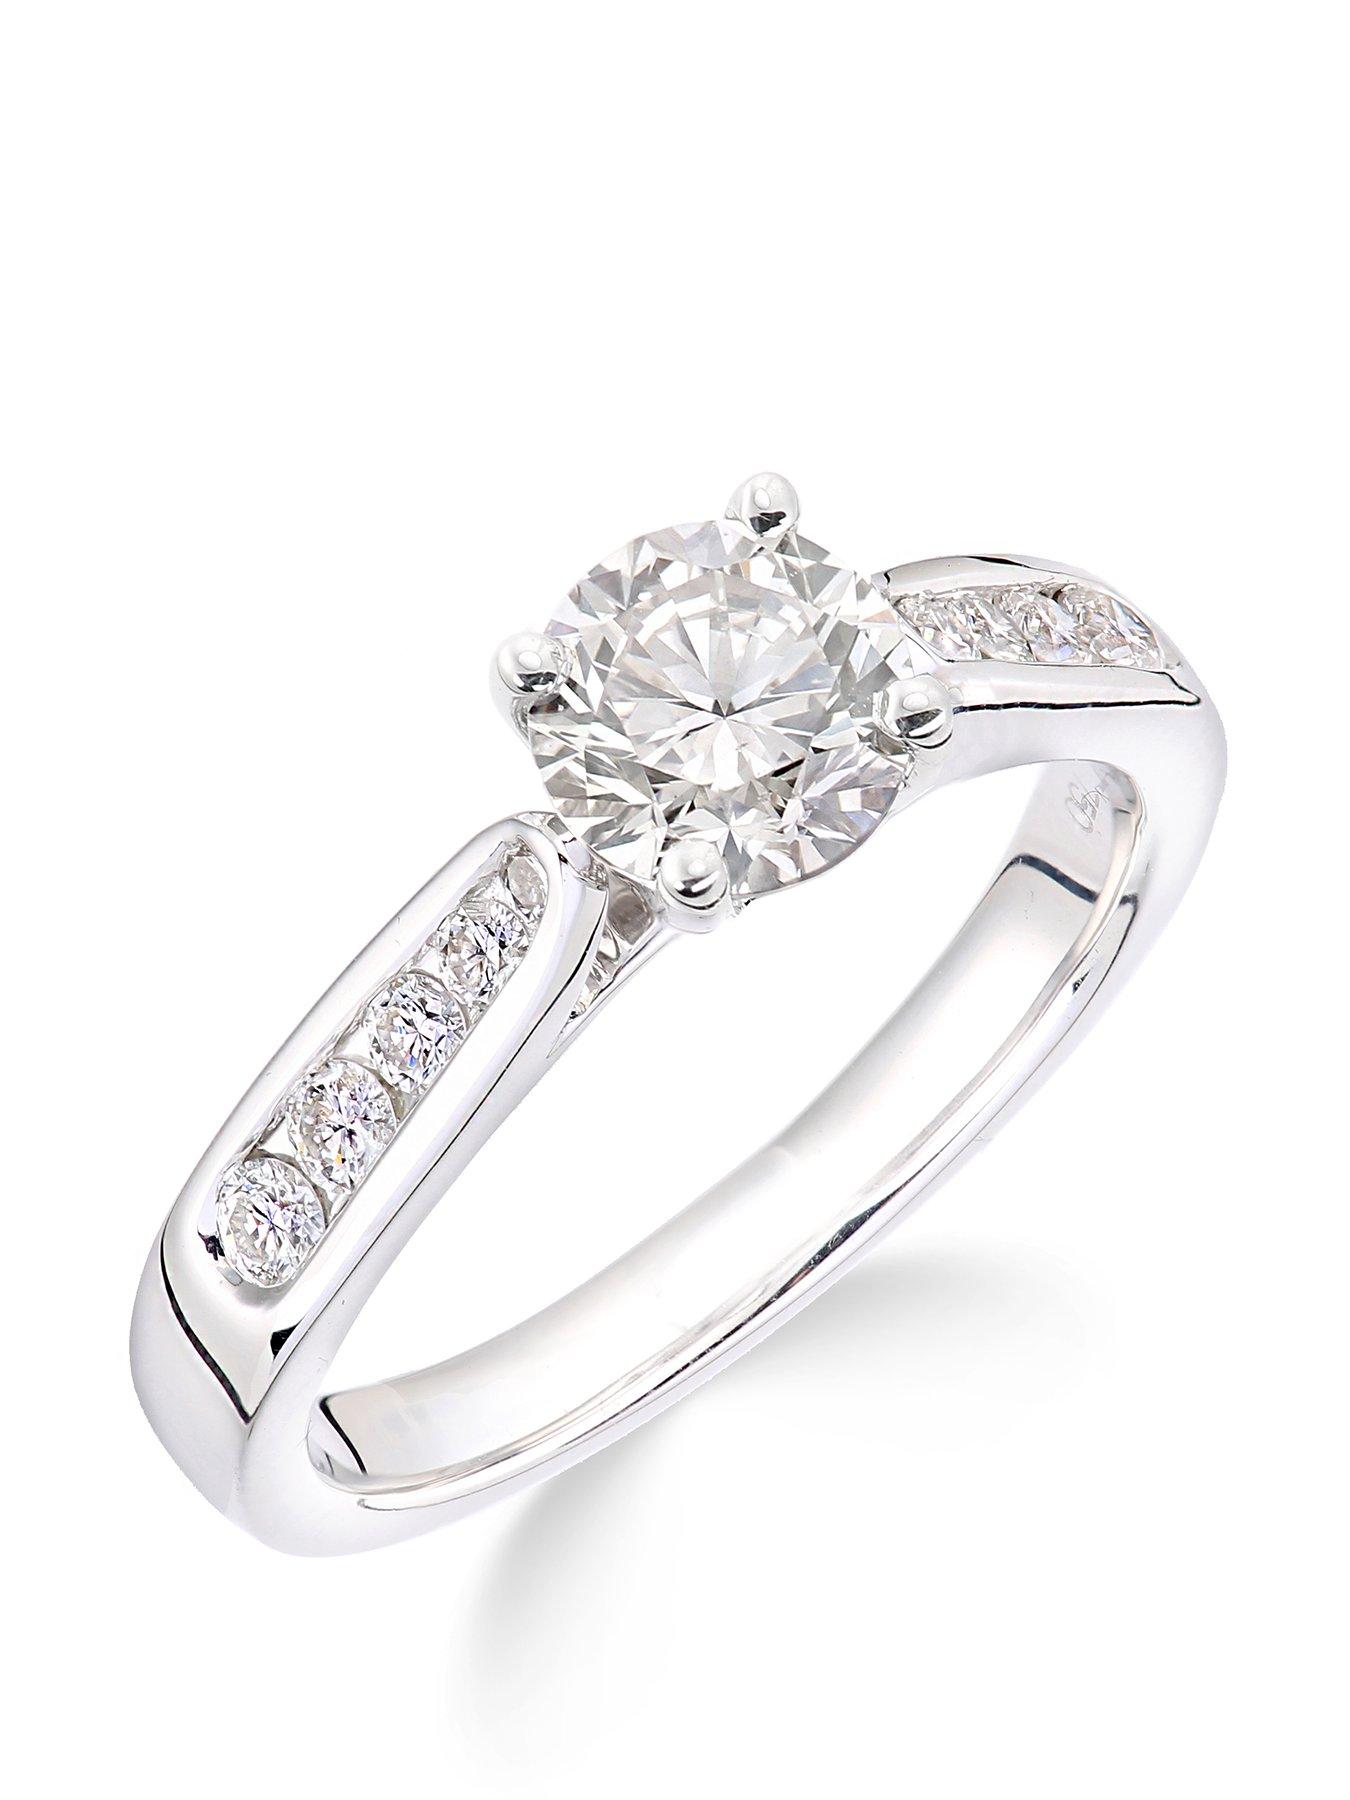 Jewellery & watches 18ct White Gold Claw Set 70 Point Diamond Ring with Diamond Set Shoulders